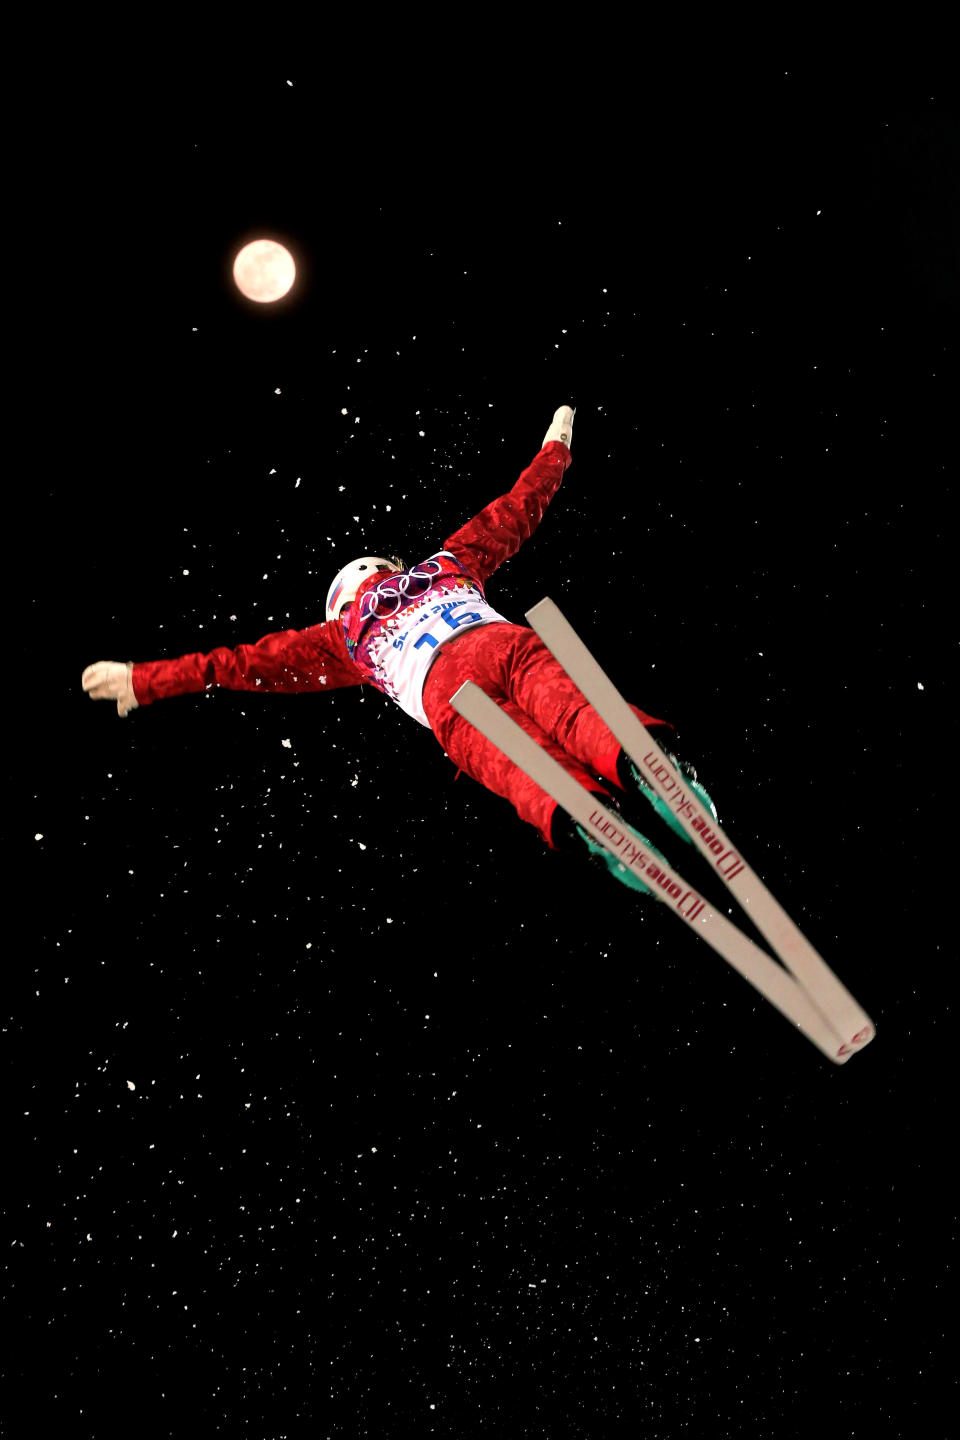 Veronika Korsunova of Russia competes in the Freestyle Skiing Ladies' Aerials Finals during the Sochi 2014 Winter Olympics at Rosa Khutor Extreme Park on February 14, 2014 in Sochi, Russia. 